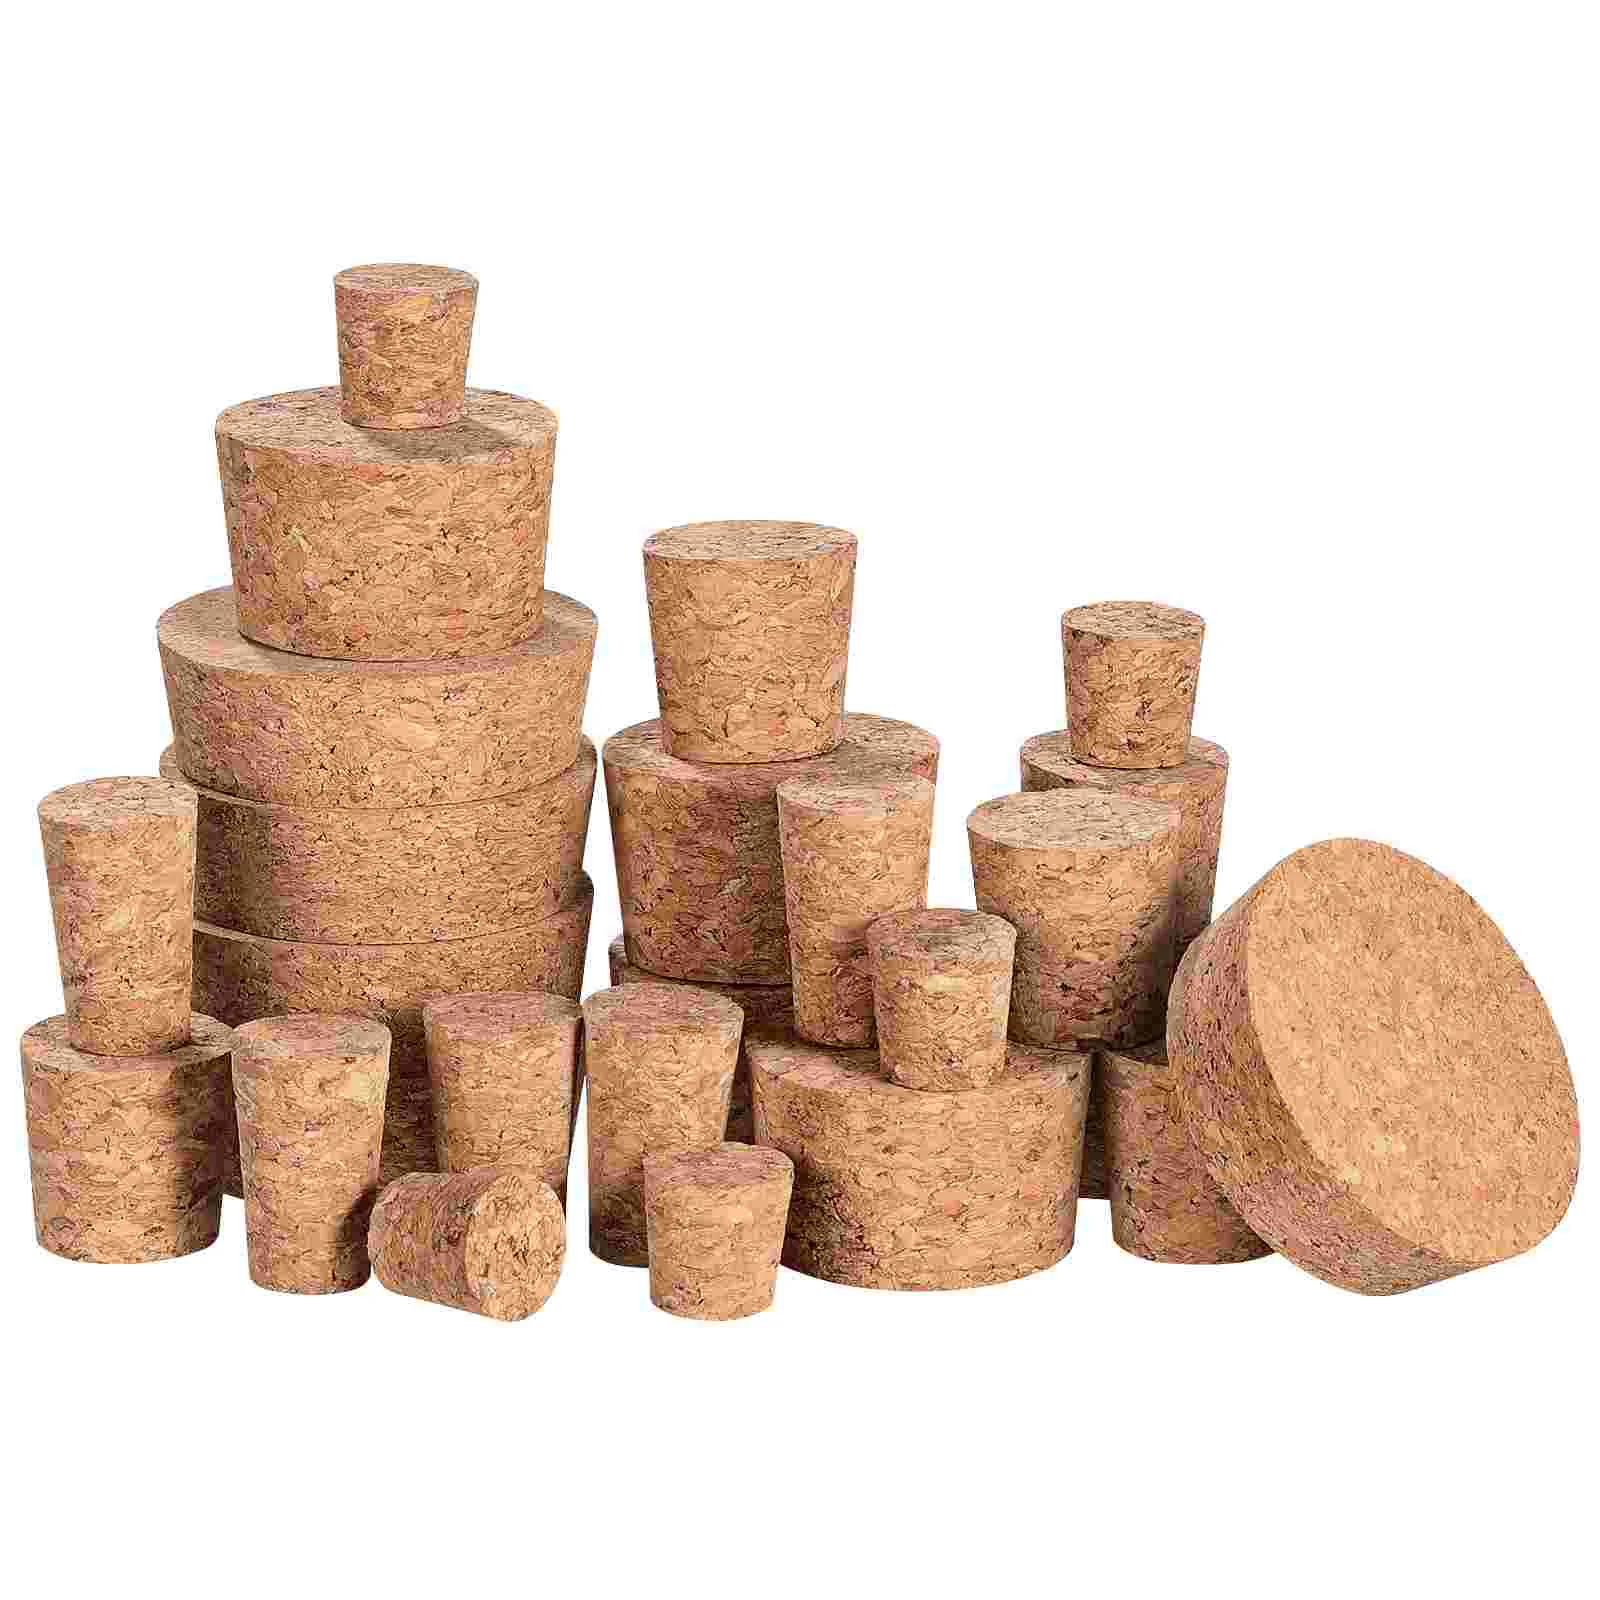 

ARTIBETTER 25pcs Tapered Cork Plugs Wooden Bottle Stoppers Stoppers Replacement Corks Bottle Plugs